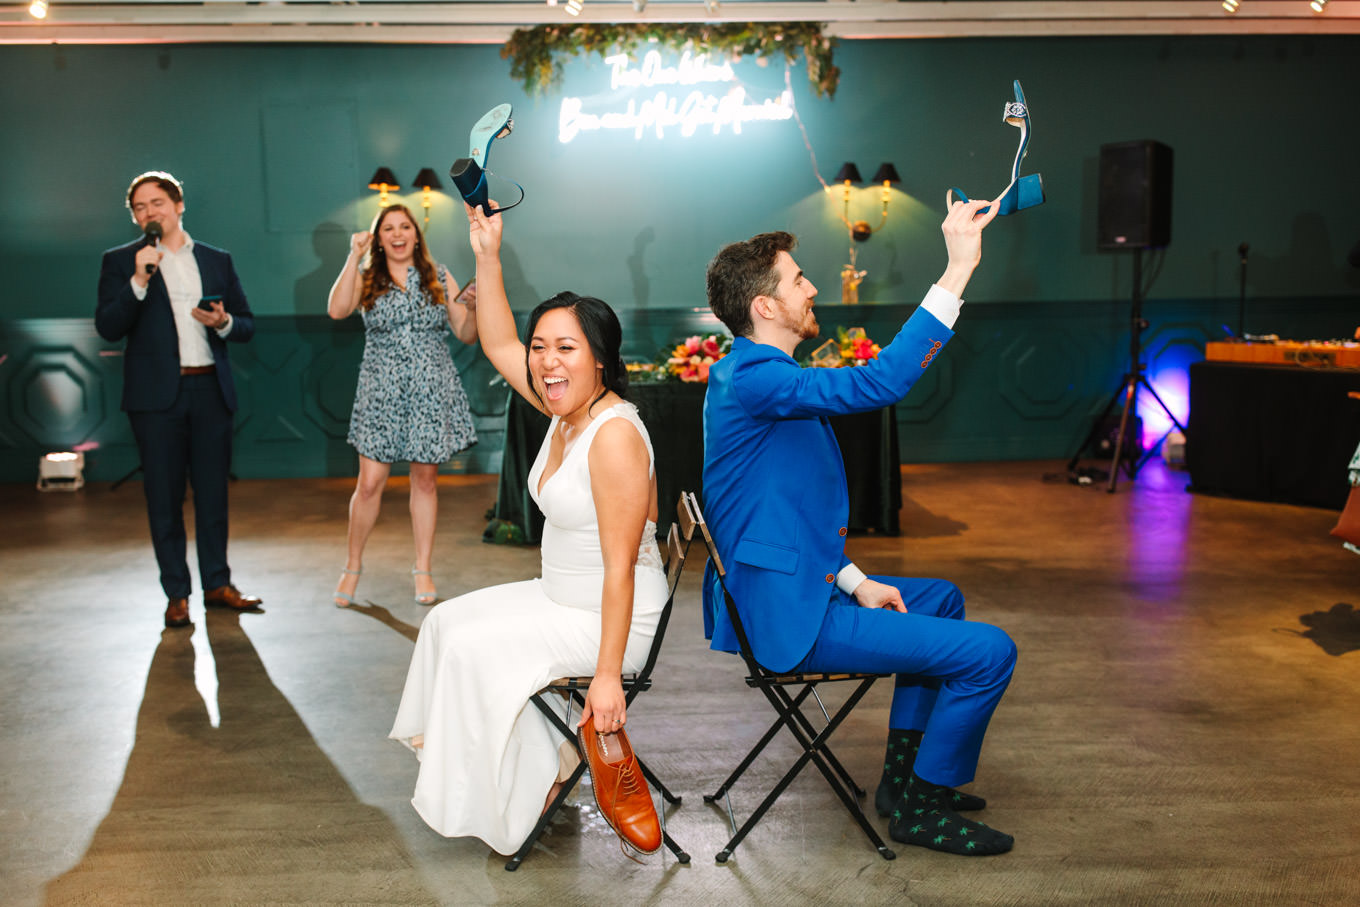 Shoe game at wedding reception | TV inspired wedding at The Fig House Los Angeles | Published on The Knot | Fresh and colorful photography for fun-loving couples in Southern California | #losangeleswedding #TVwedding #colorfulwedding #theknot   Source: Mary Costa Photography | Los Angeles wedding photographer